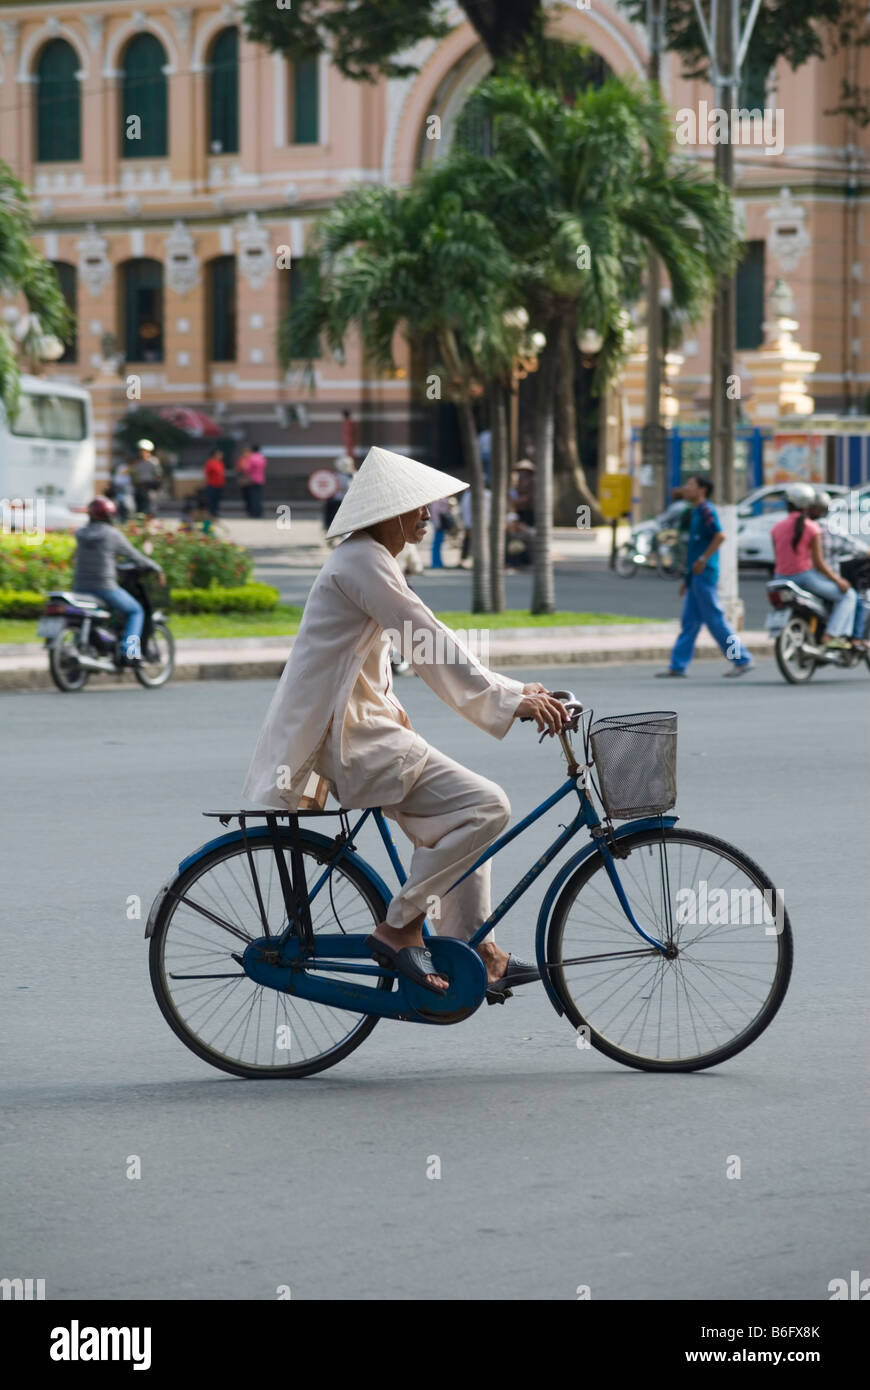 A man wearing traditional Vietnamese clothes and conical hat, cycling along a street in central Ho Chi Minh City, Vietnam Stock Photo